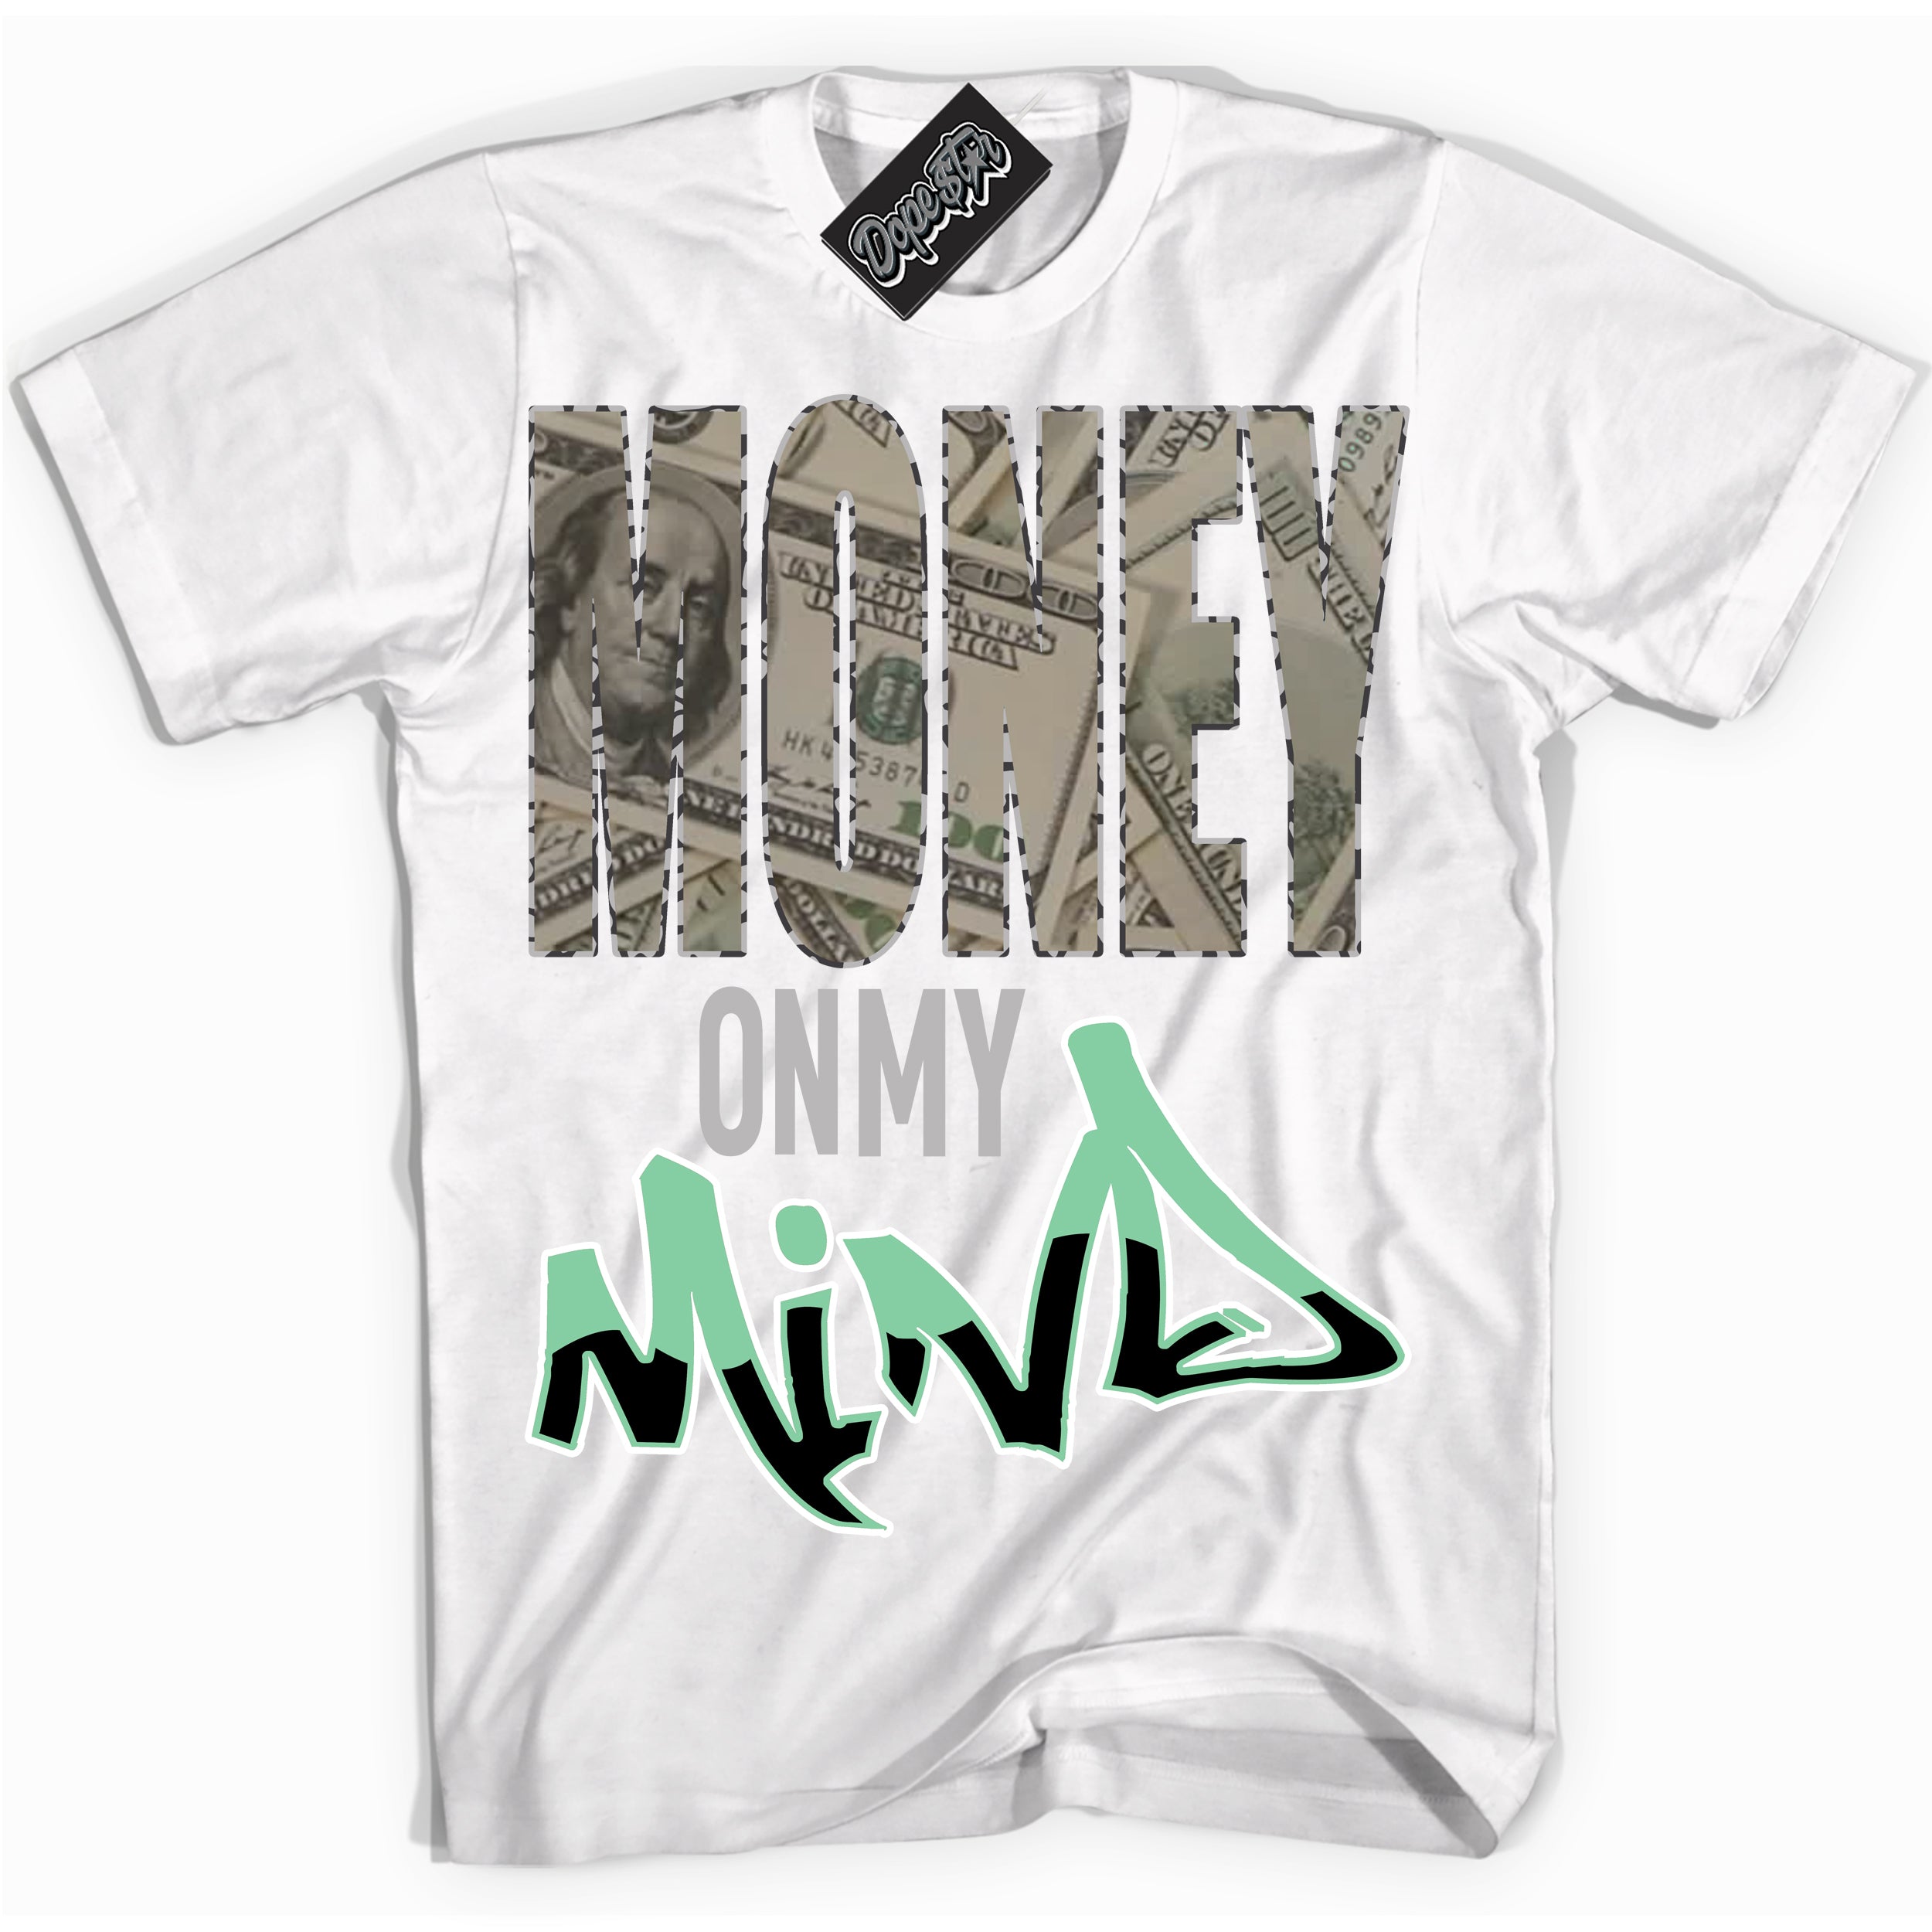 Cool White graphic tee with “ Money On My Mind ” design, that perfectly matches Green Glow 3s sneakers 